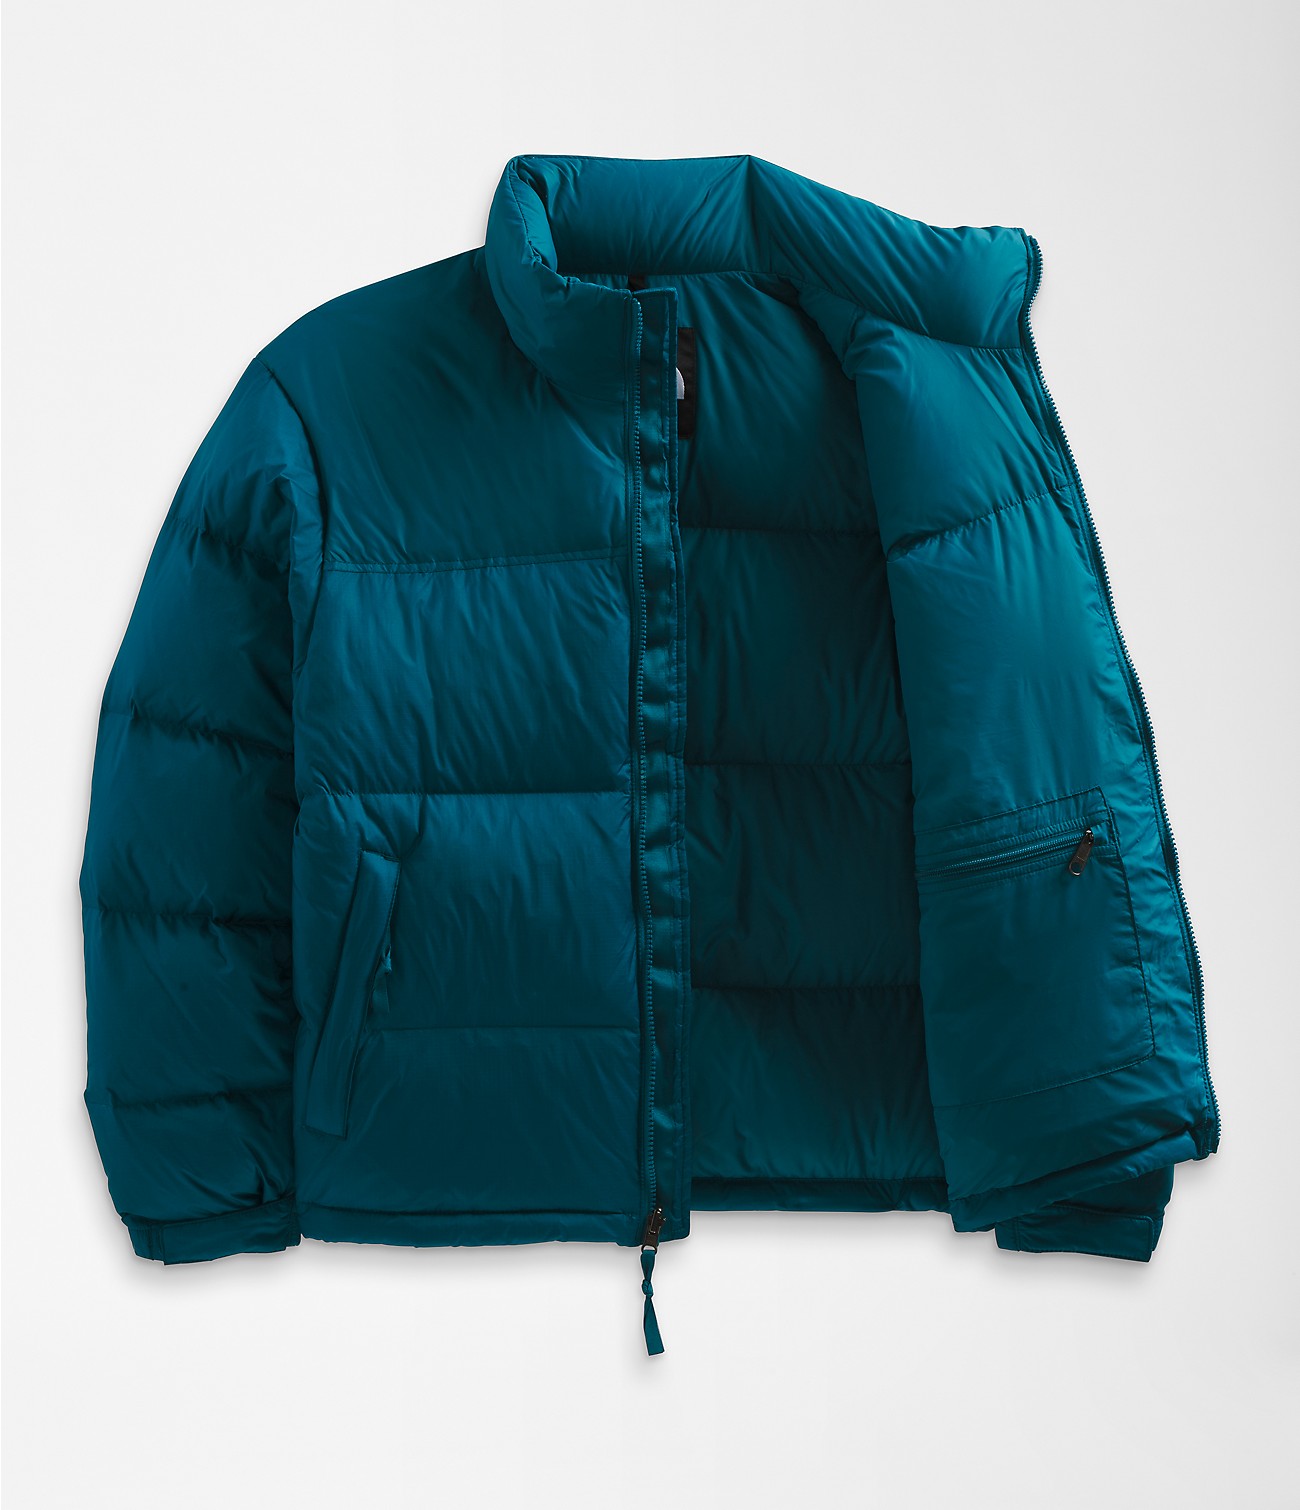 Unlock Wilderness' choice in the North Face Vs Tommy Hilfiger comparison, the 1996 Retro Nuptse Jacket by The North Face